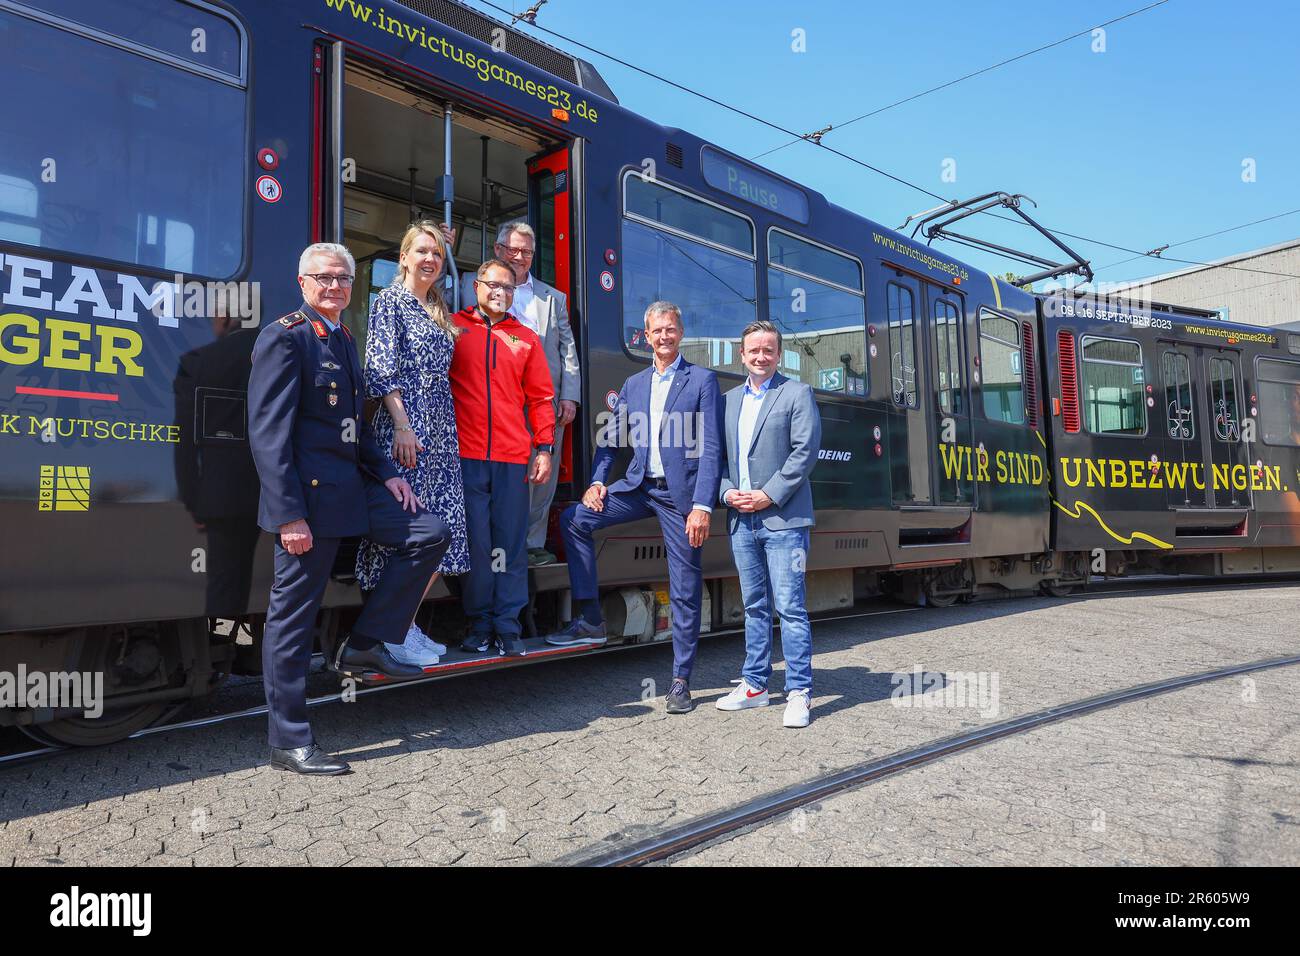 Düsseldorf, Germany, 06.06.2023. l-r Brigadegeneral Alfred Marstaller (Project manager, Invictus Games), Annette Grabbe (CFO), Michael Richarz (Technical Manager), competitor Seargent Milan A., Düsseldorf Mayor Joseph Hinkel and Martin Ammermann (Project manager Invictus Games). Düsseldorf transport network Rheinbahn presents an Invictus Games 2023 branded Tram. The games take place in the city in September 2023. Credit: newsNRW / Alamy Live News Stock Photo